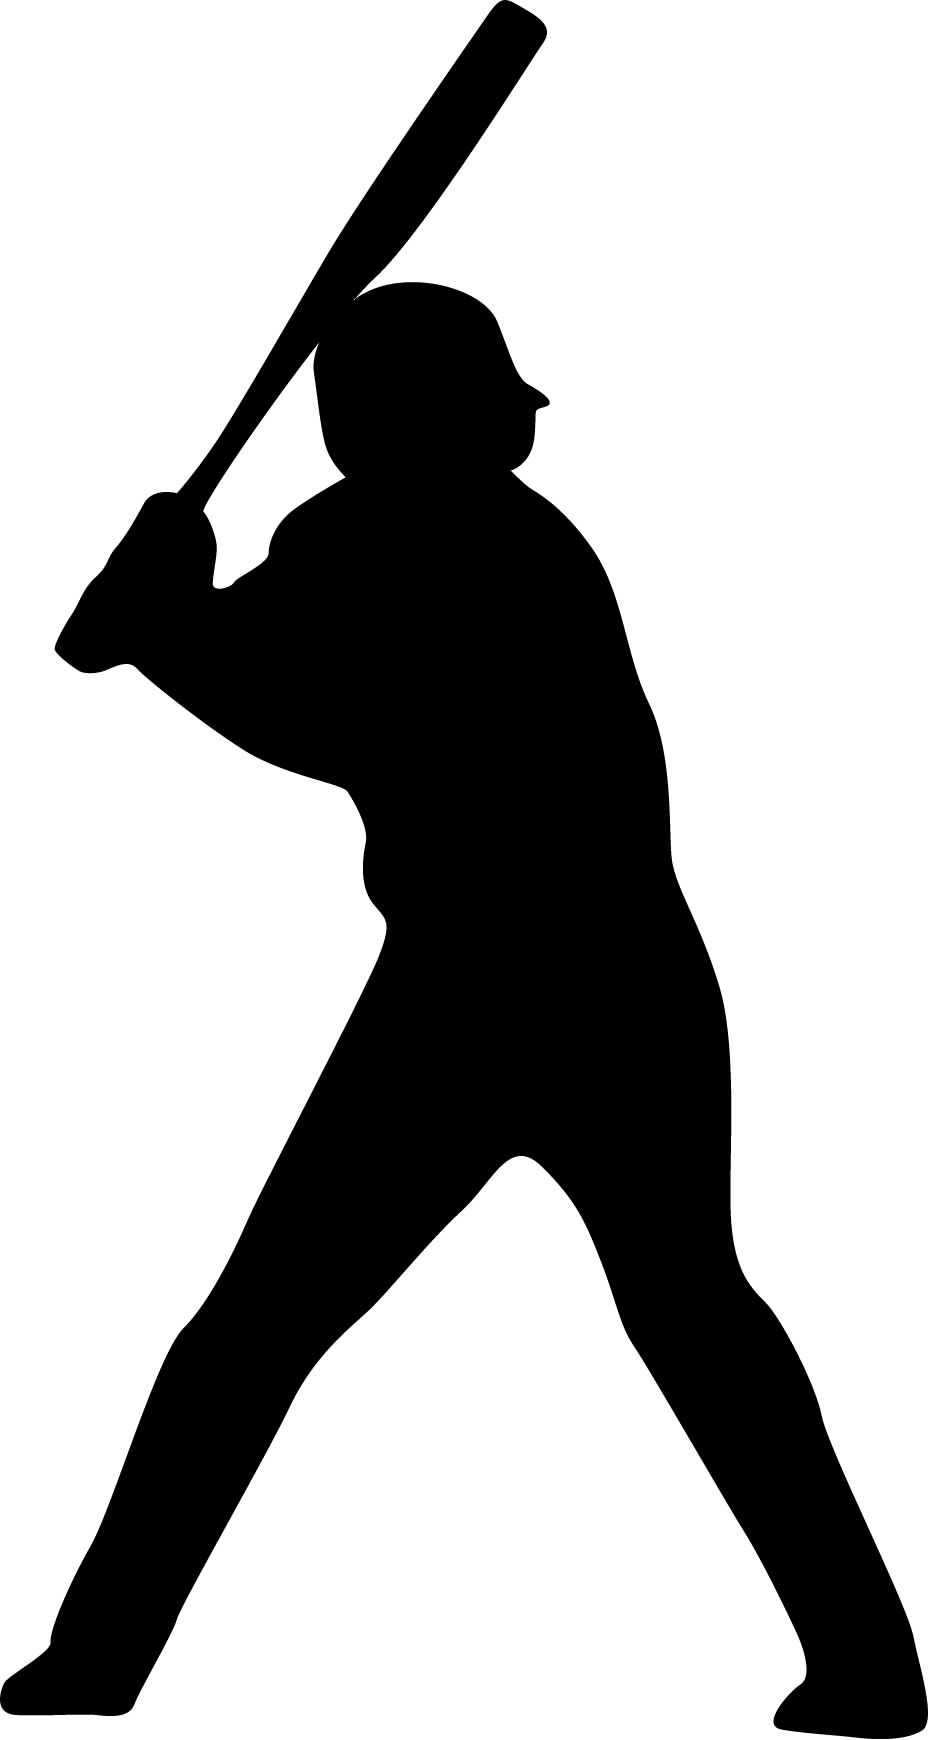 Baseball Player PNG Image for Free Download